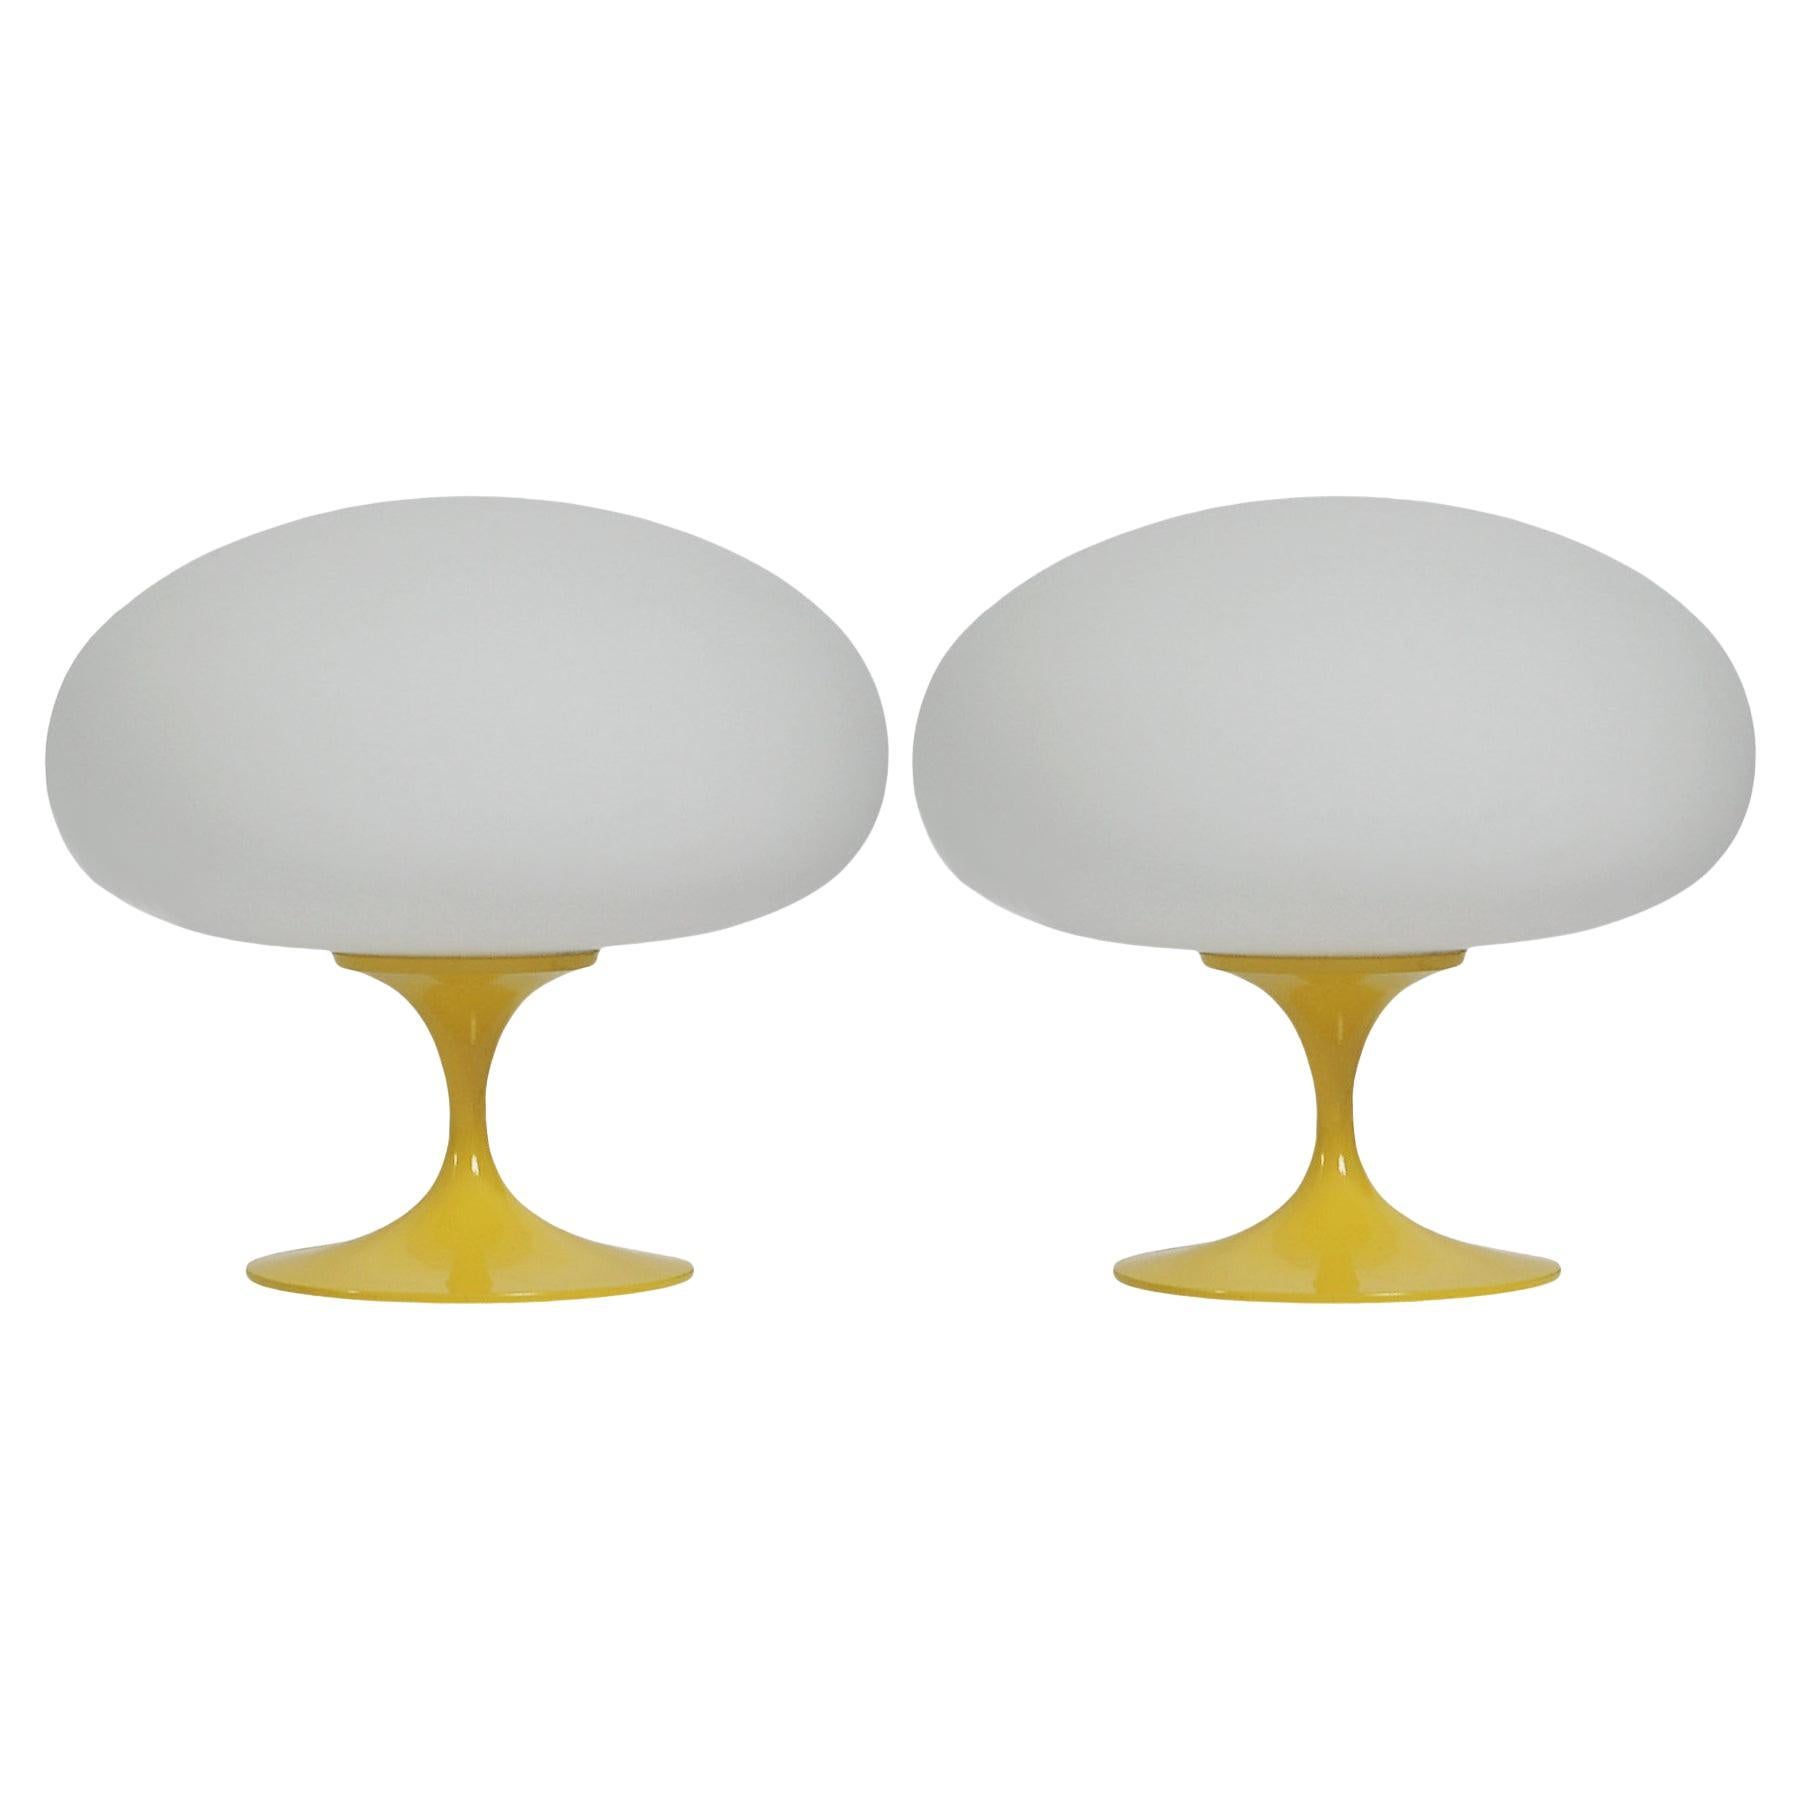 Pair of Mid Century Tulip Mushroom Lamps by Design Line in Yellow & White Glass